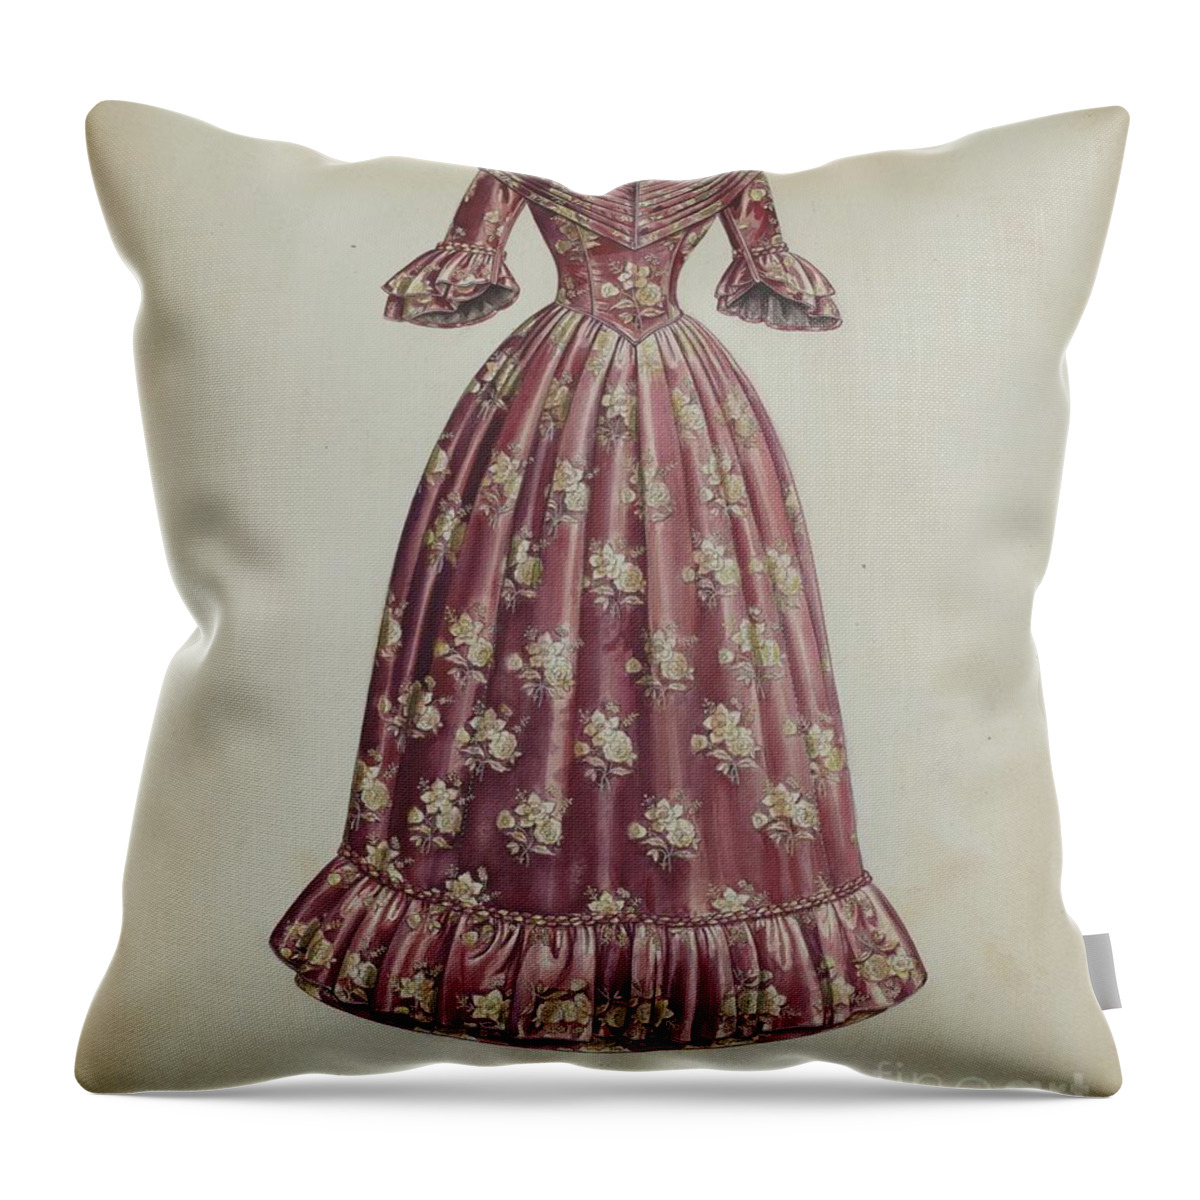  Throw Pillow featuring the drawing Dress by Jean Peszel